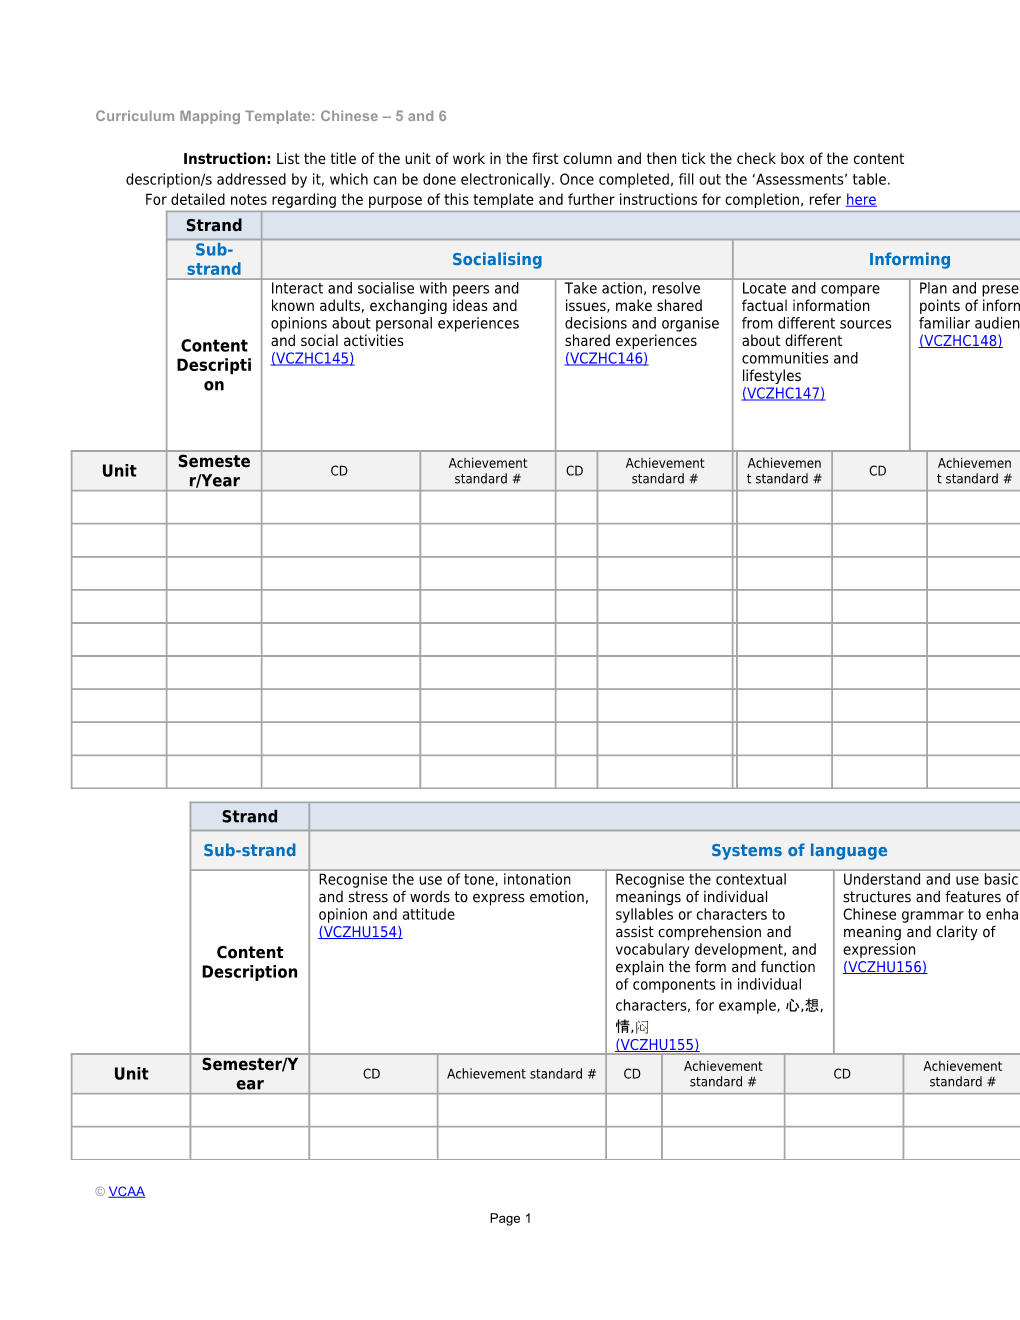 Curriculum Mapping Template: Chinese 5 and 6